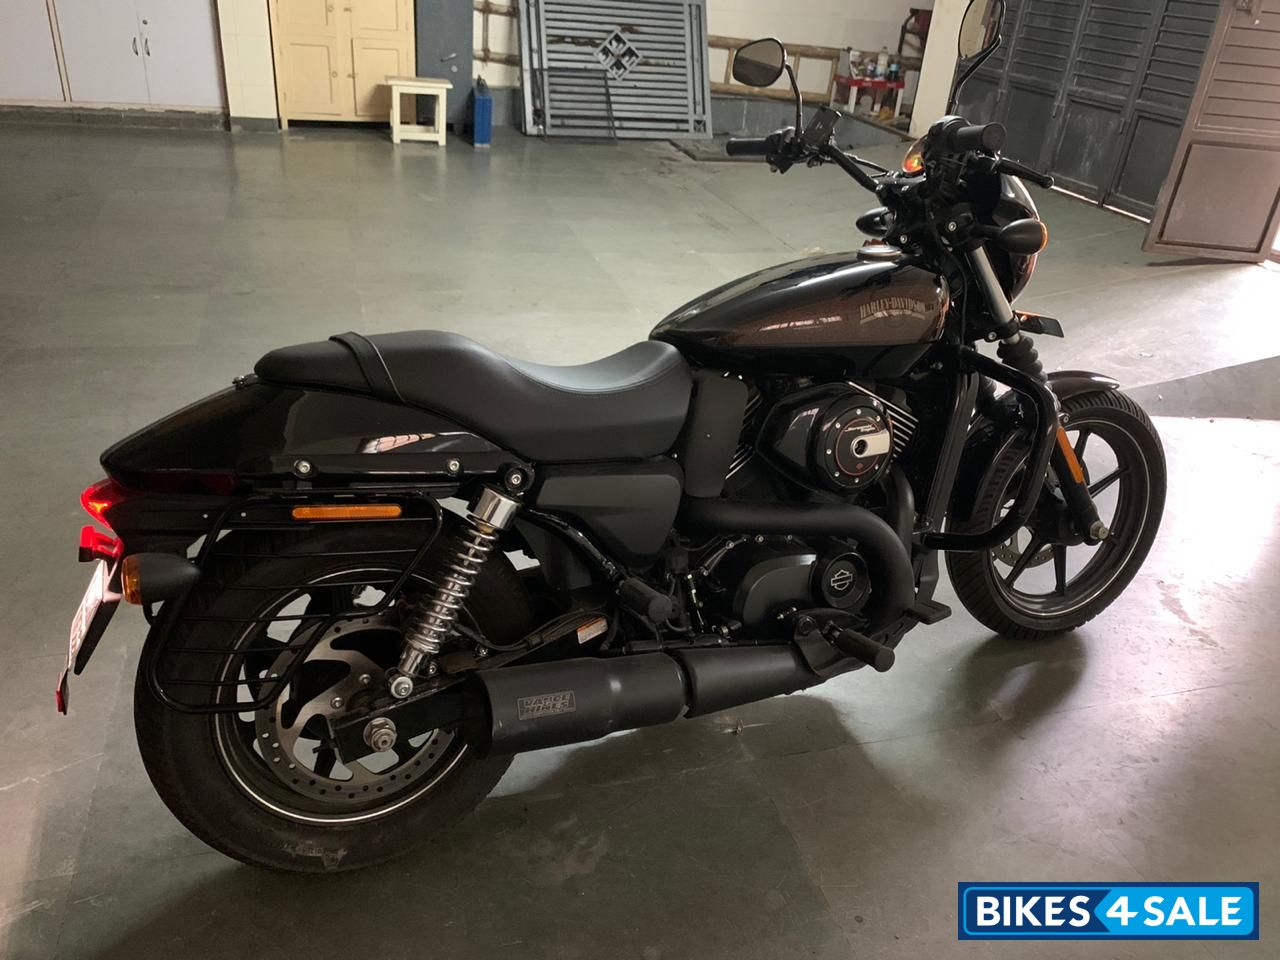 Used 2020 model Harley Davidson Street 750 for sale in Bangalore. ID